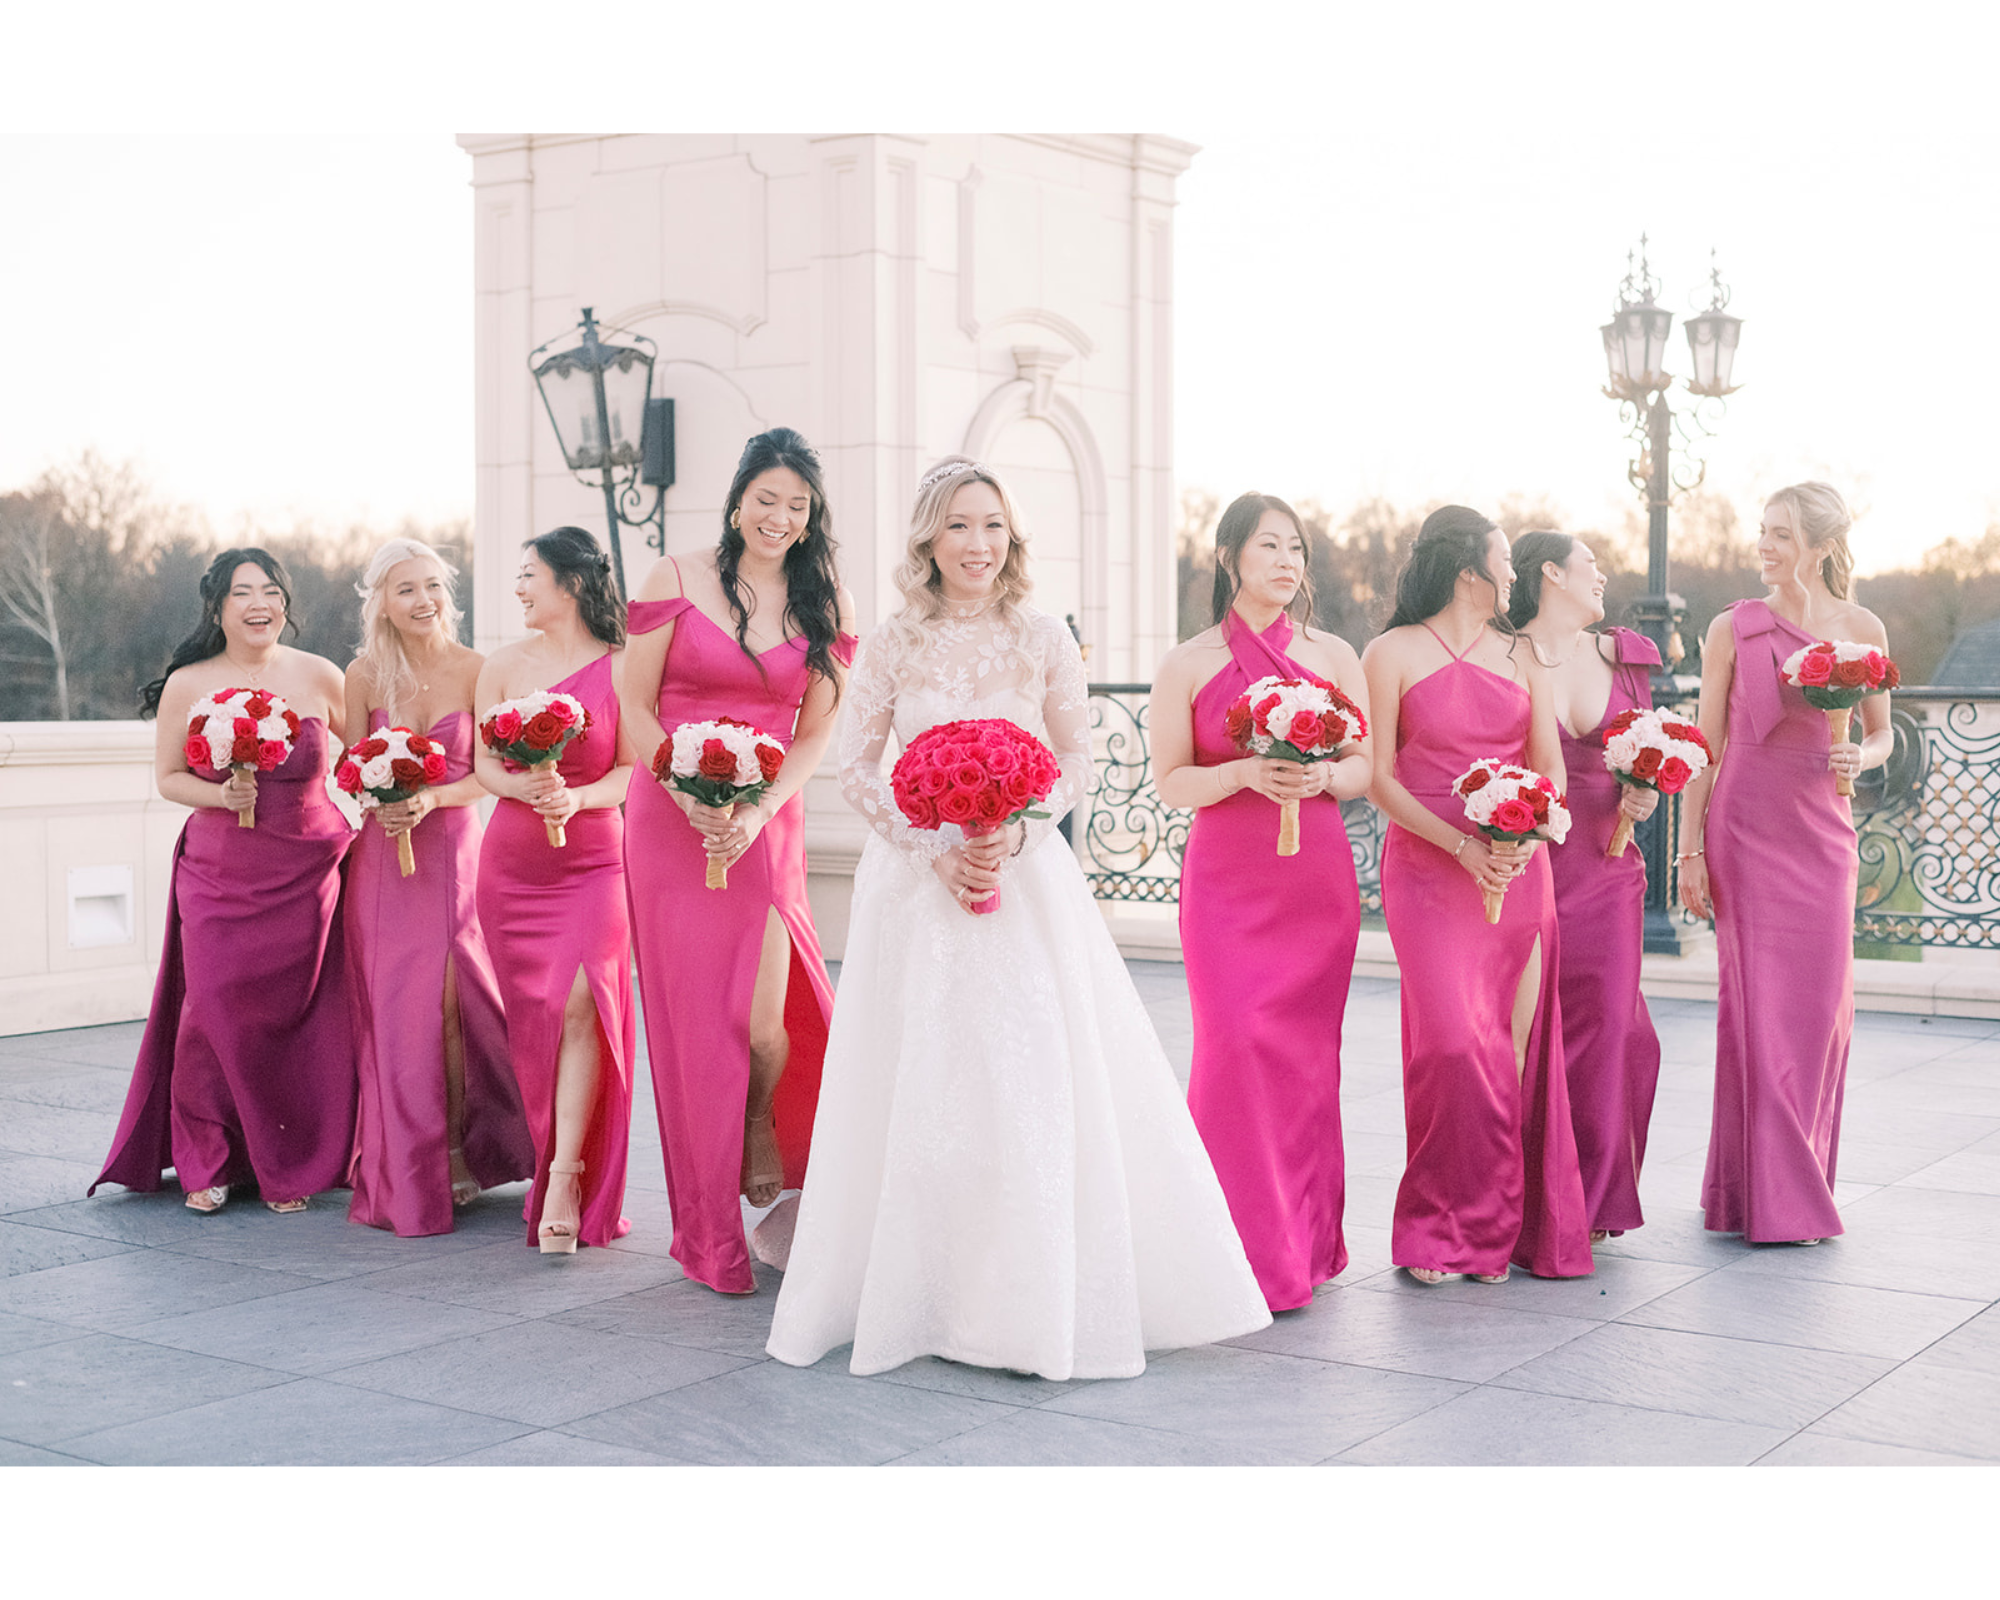 Yvonne in her magenta second wedding dress with her bridesmaids wearing complimentary pink dresses.